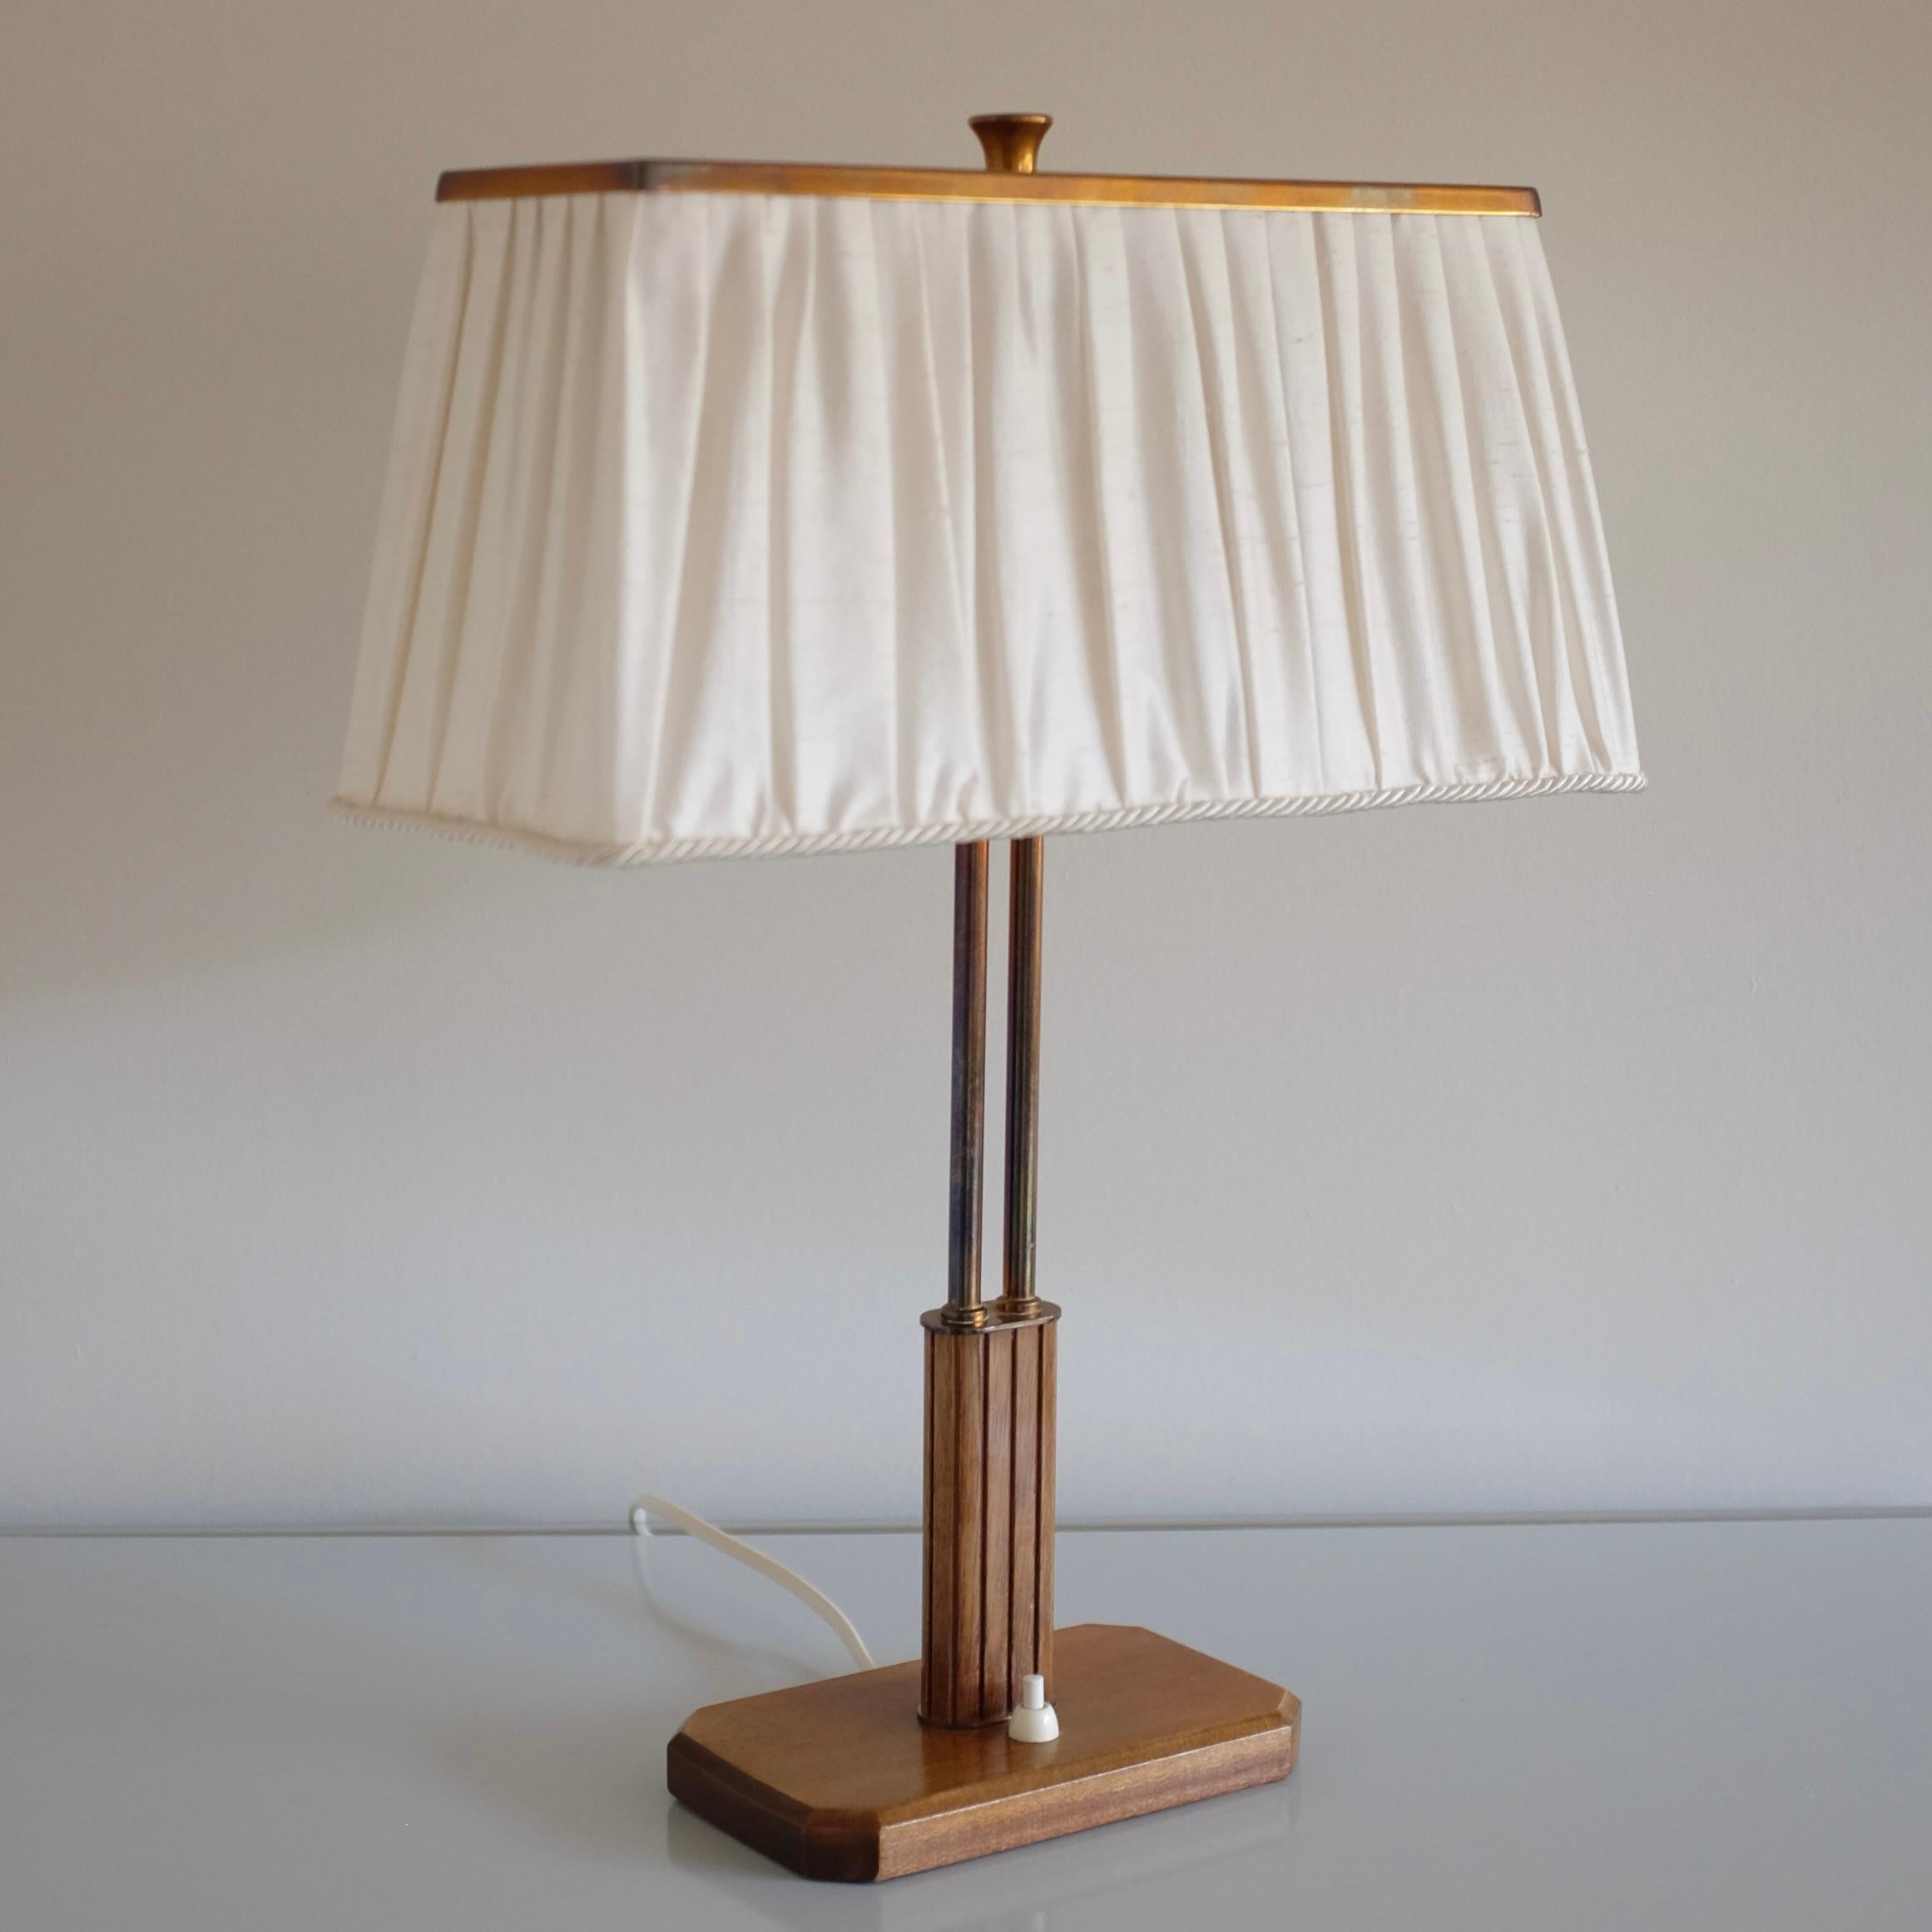 Beautiful 1940s Table lamp model 15485 by Böhlmarks, Sweden, possibly designed by Harald Notini. Wooden lamp base with carved details and brass. There are 2 lights under a silk lampshade topped with a brass plate and mounting hardware. In a great